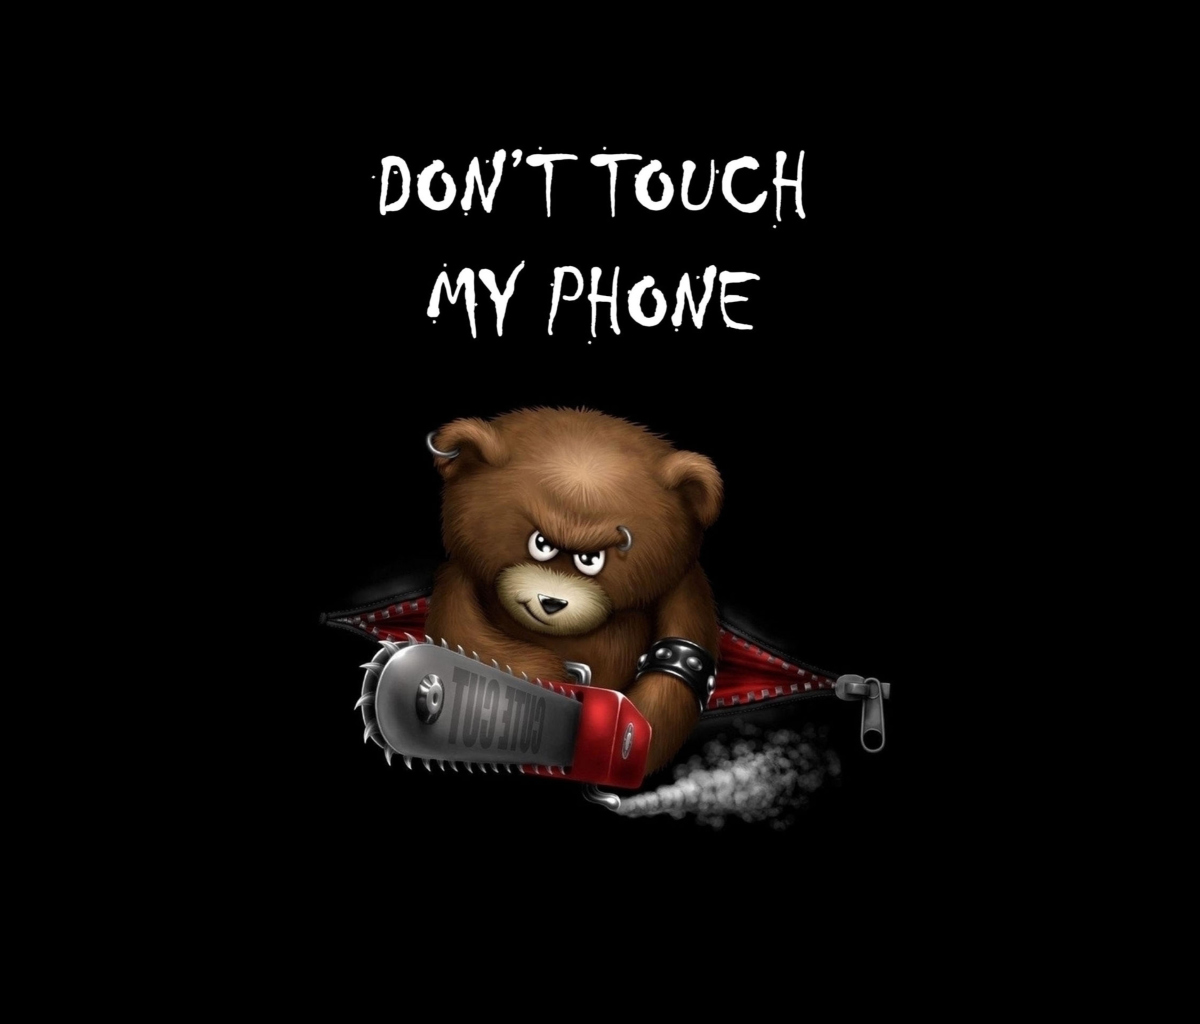 Dont Touch My Phone wallpaper 1200x1024